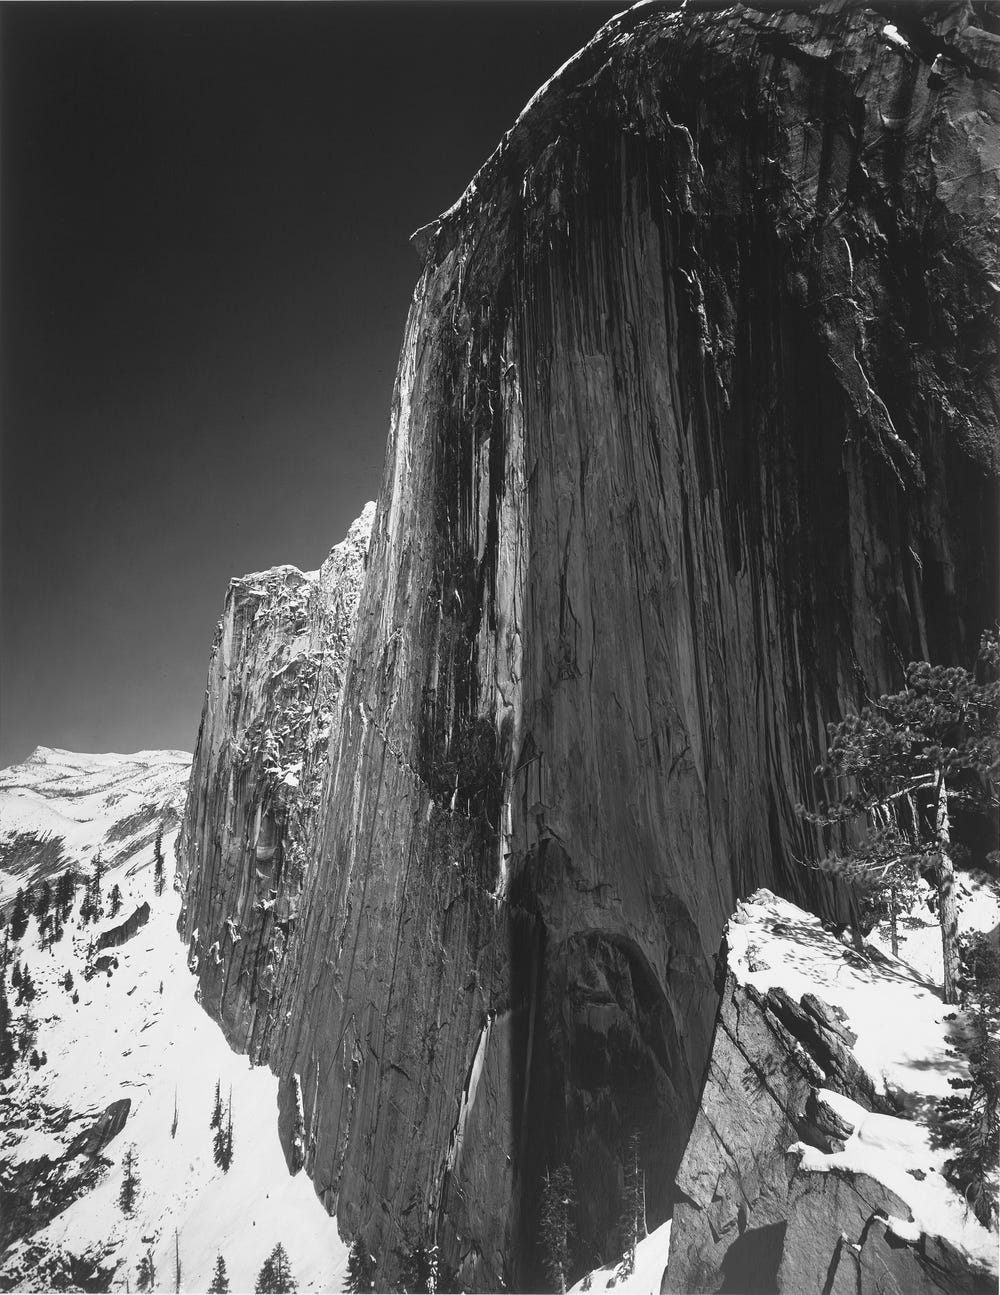 Black and white photograph of Half Dome by Ansel Adams